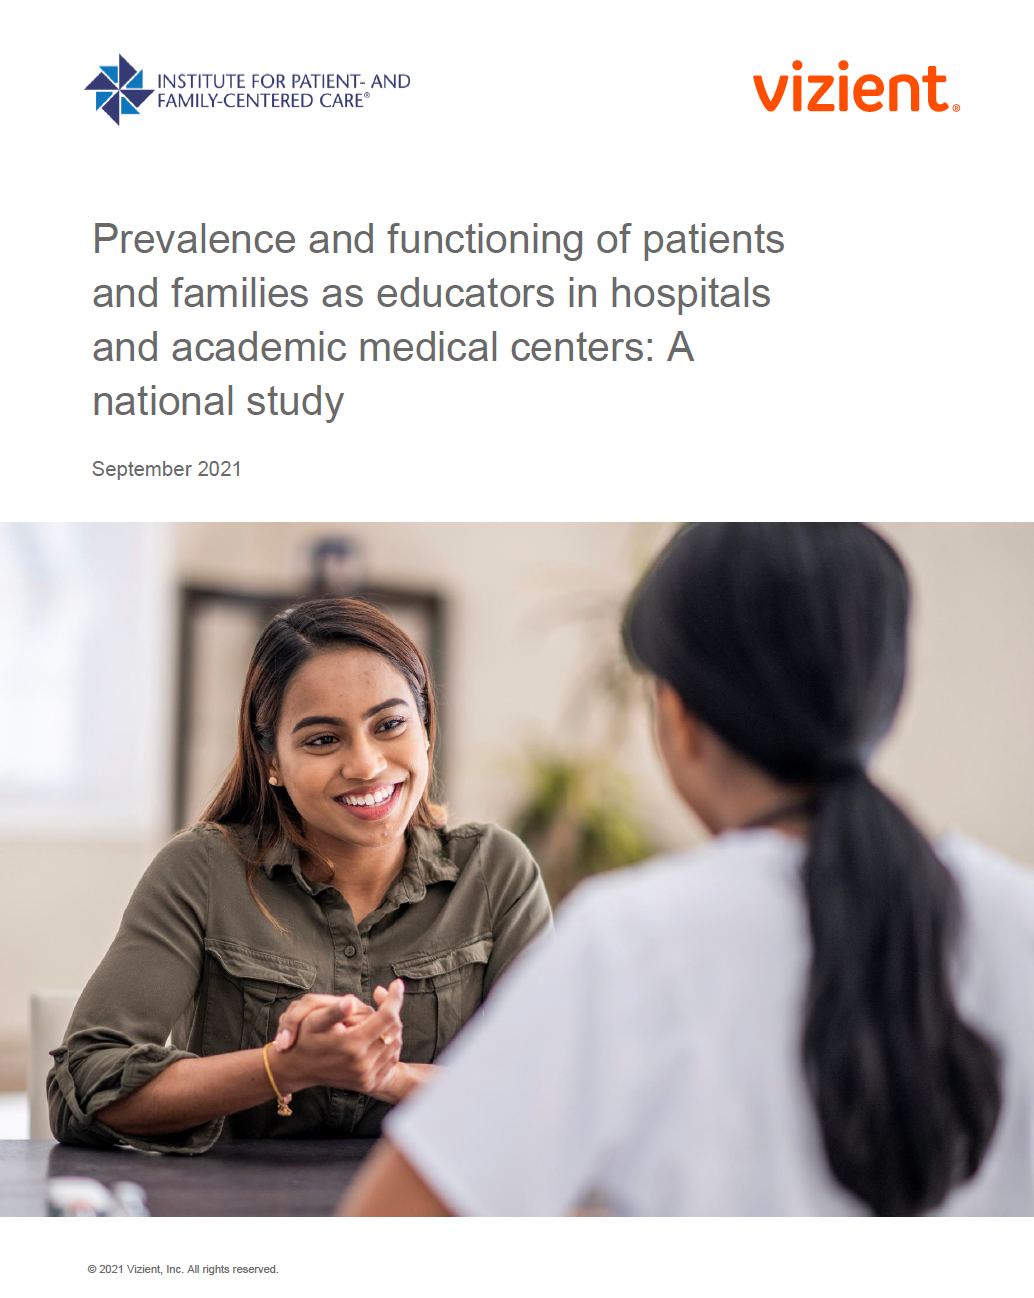 Prevalence and Functioning of Patients and Families as Educators in Hospitals and Academic Medical Centers: A National Study